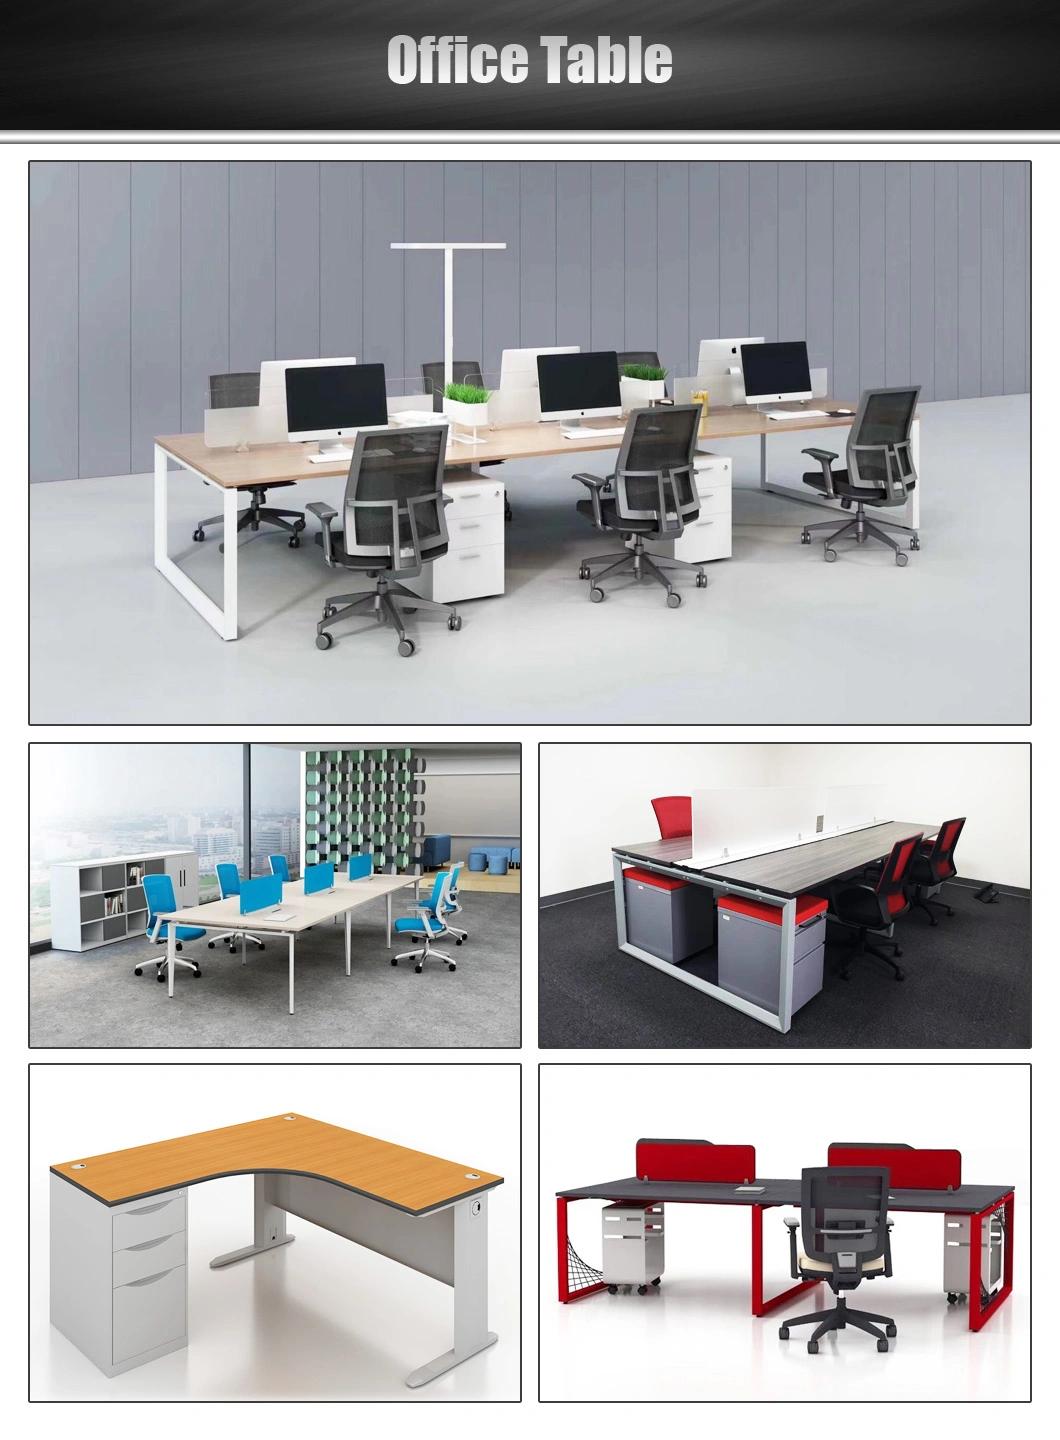 China Modern Office System Furniture with Office Desk Table and Portable Filing Cabinet